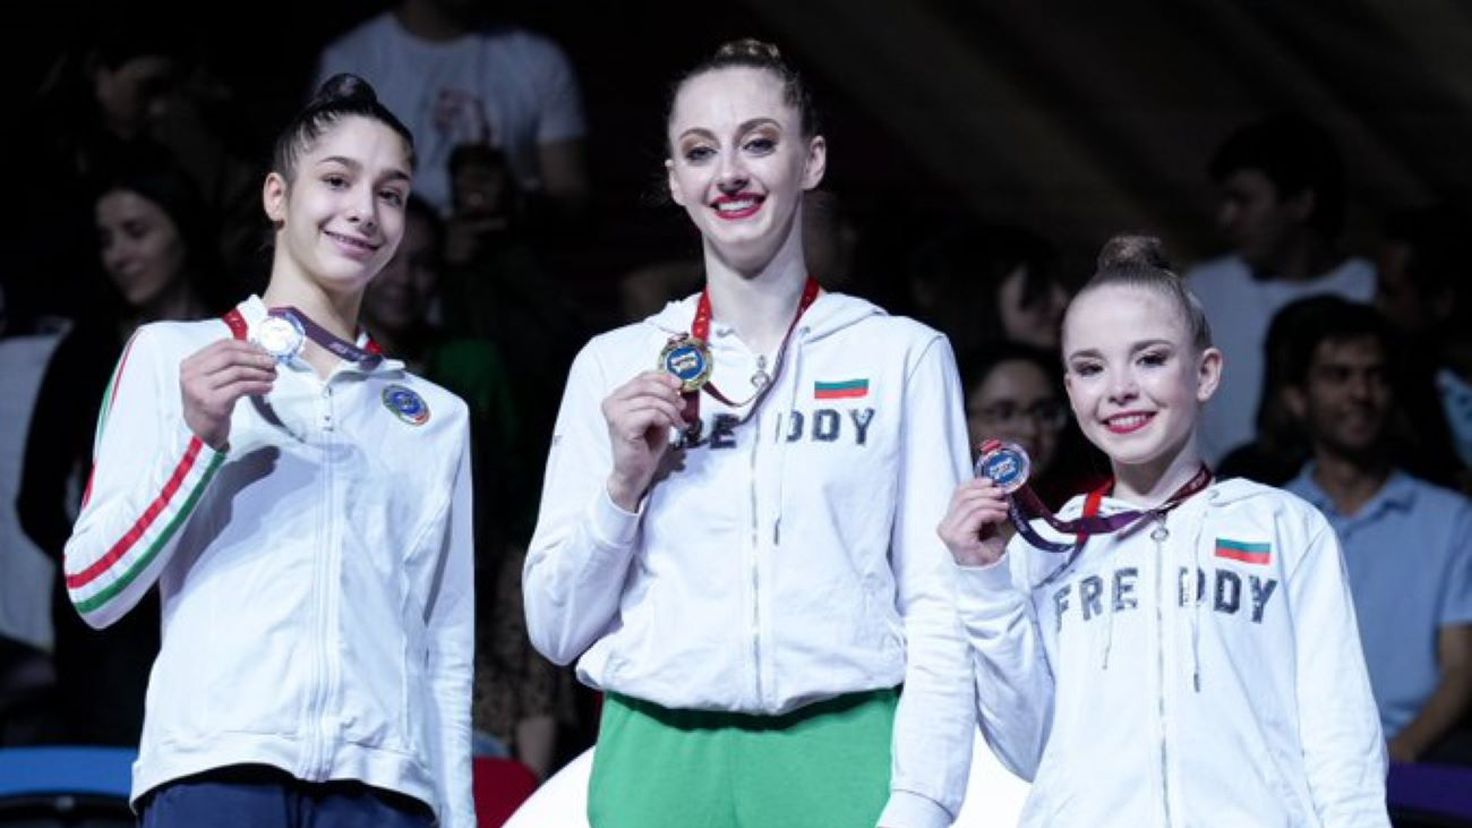 The Bulgarians win together and individually
